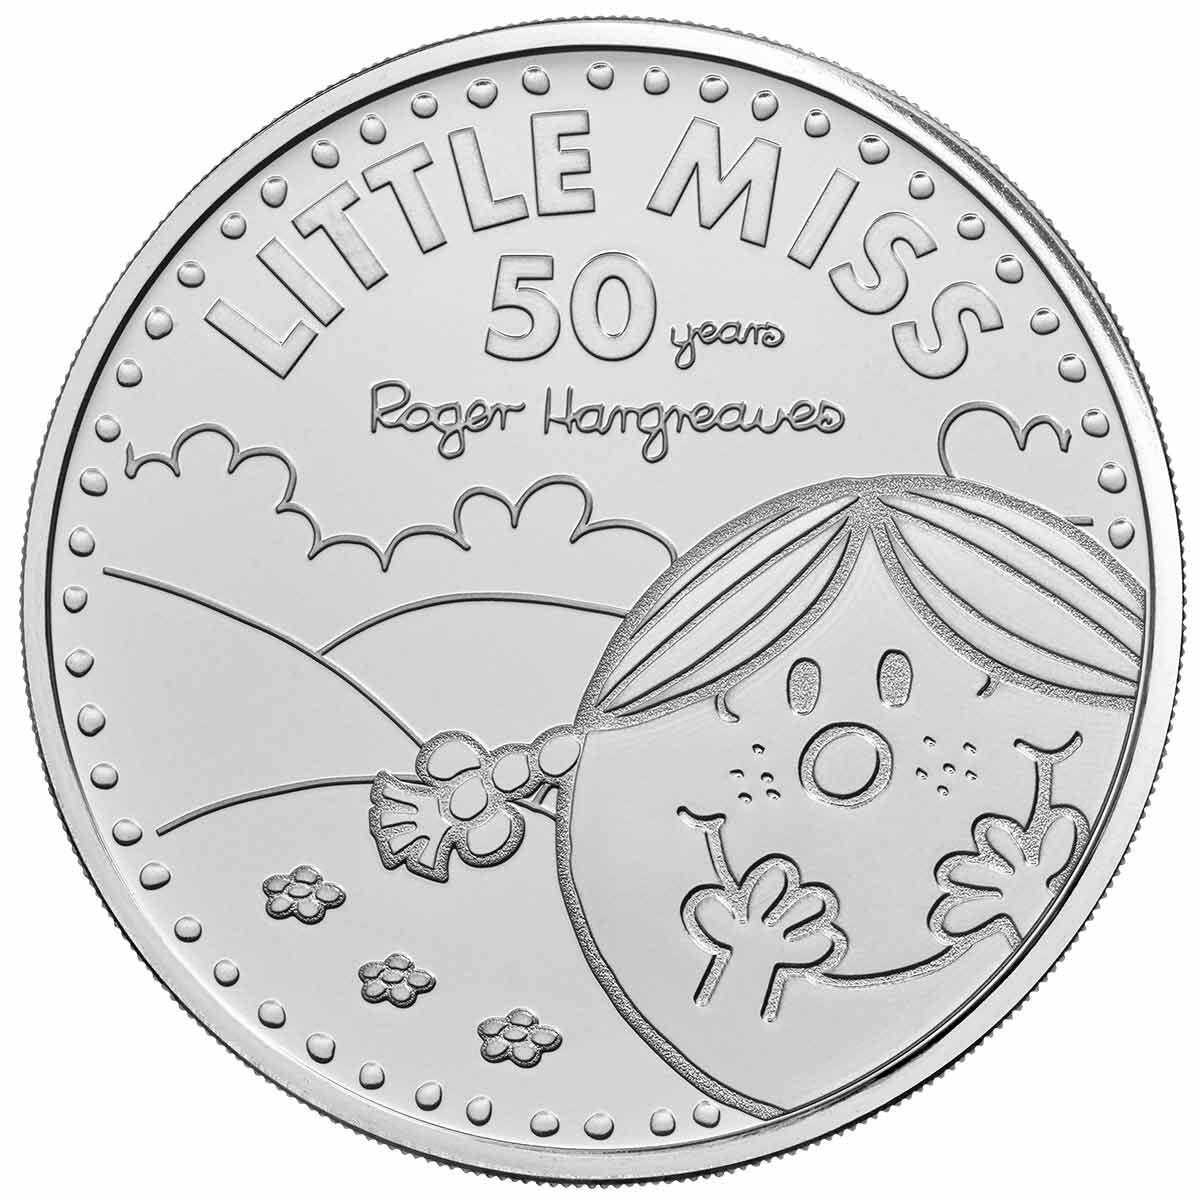 2021 £5 Little Miss Sunshine - 50th Anniversary of Mr. Men Brilliant Uncirculated Coin